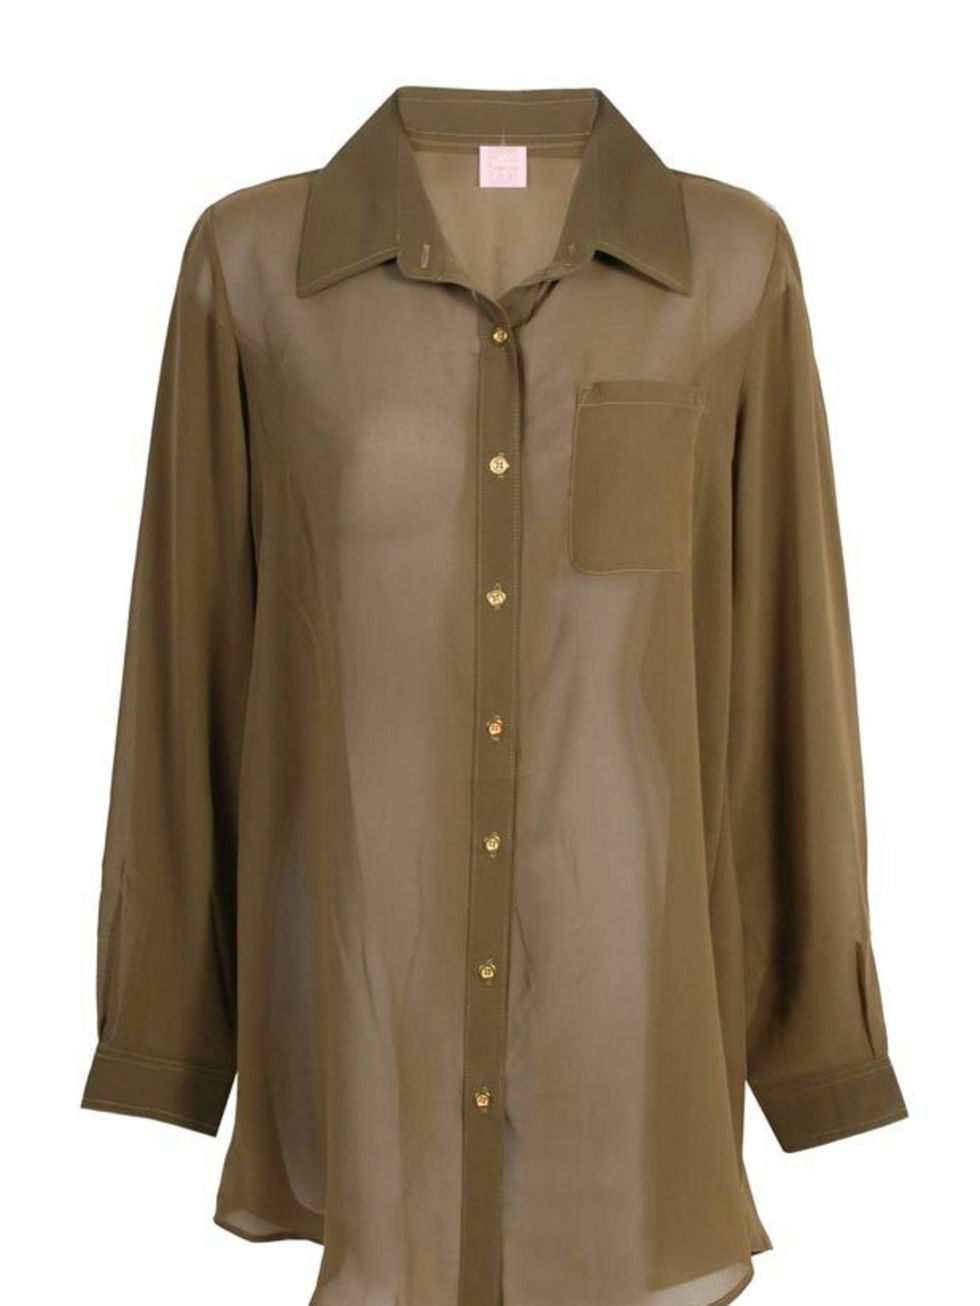 <p> </p><p>Oversized, semi-sheer shirts are uber versatile and trans-seasonal. Wear with just about everything and everywhere- from the office to a weekend outing NFD khaki shirt, £39, at <a href="http://www.pretaportobello.com/shop/tops/tops/never-fully